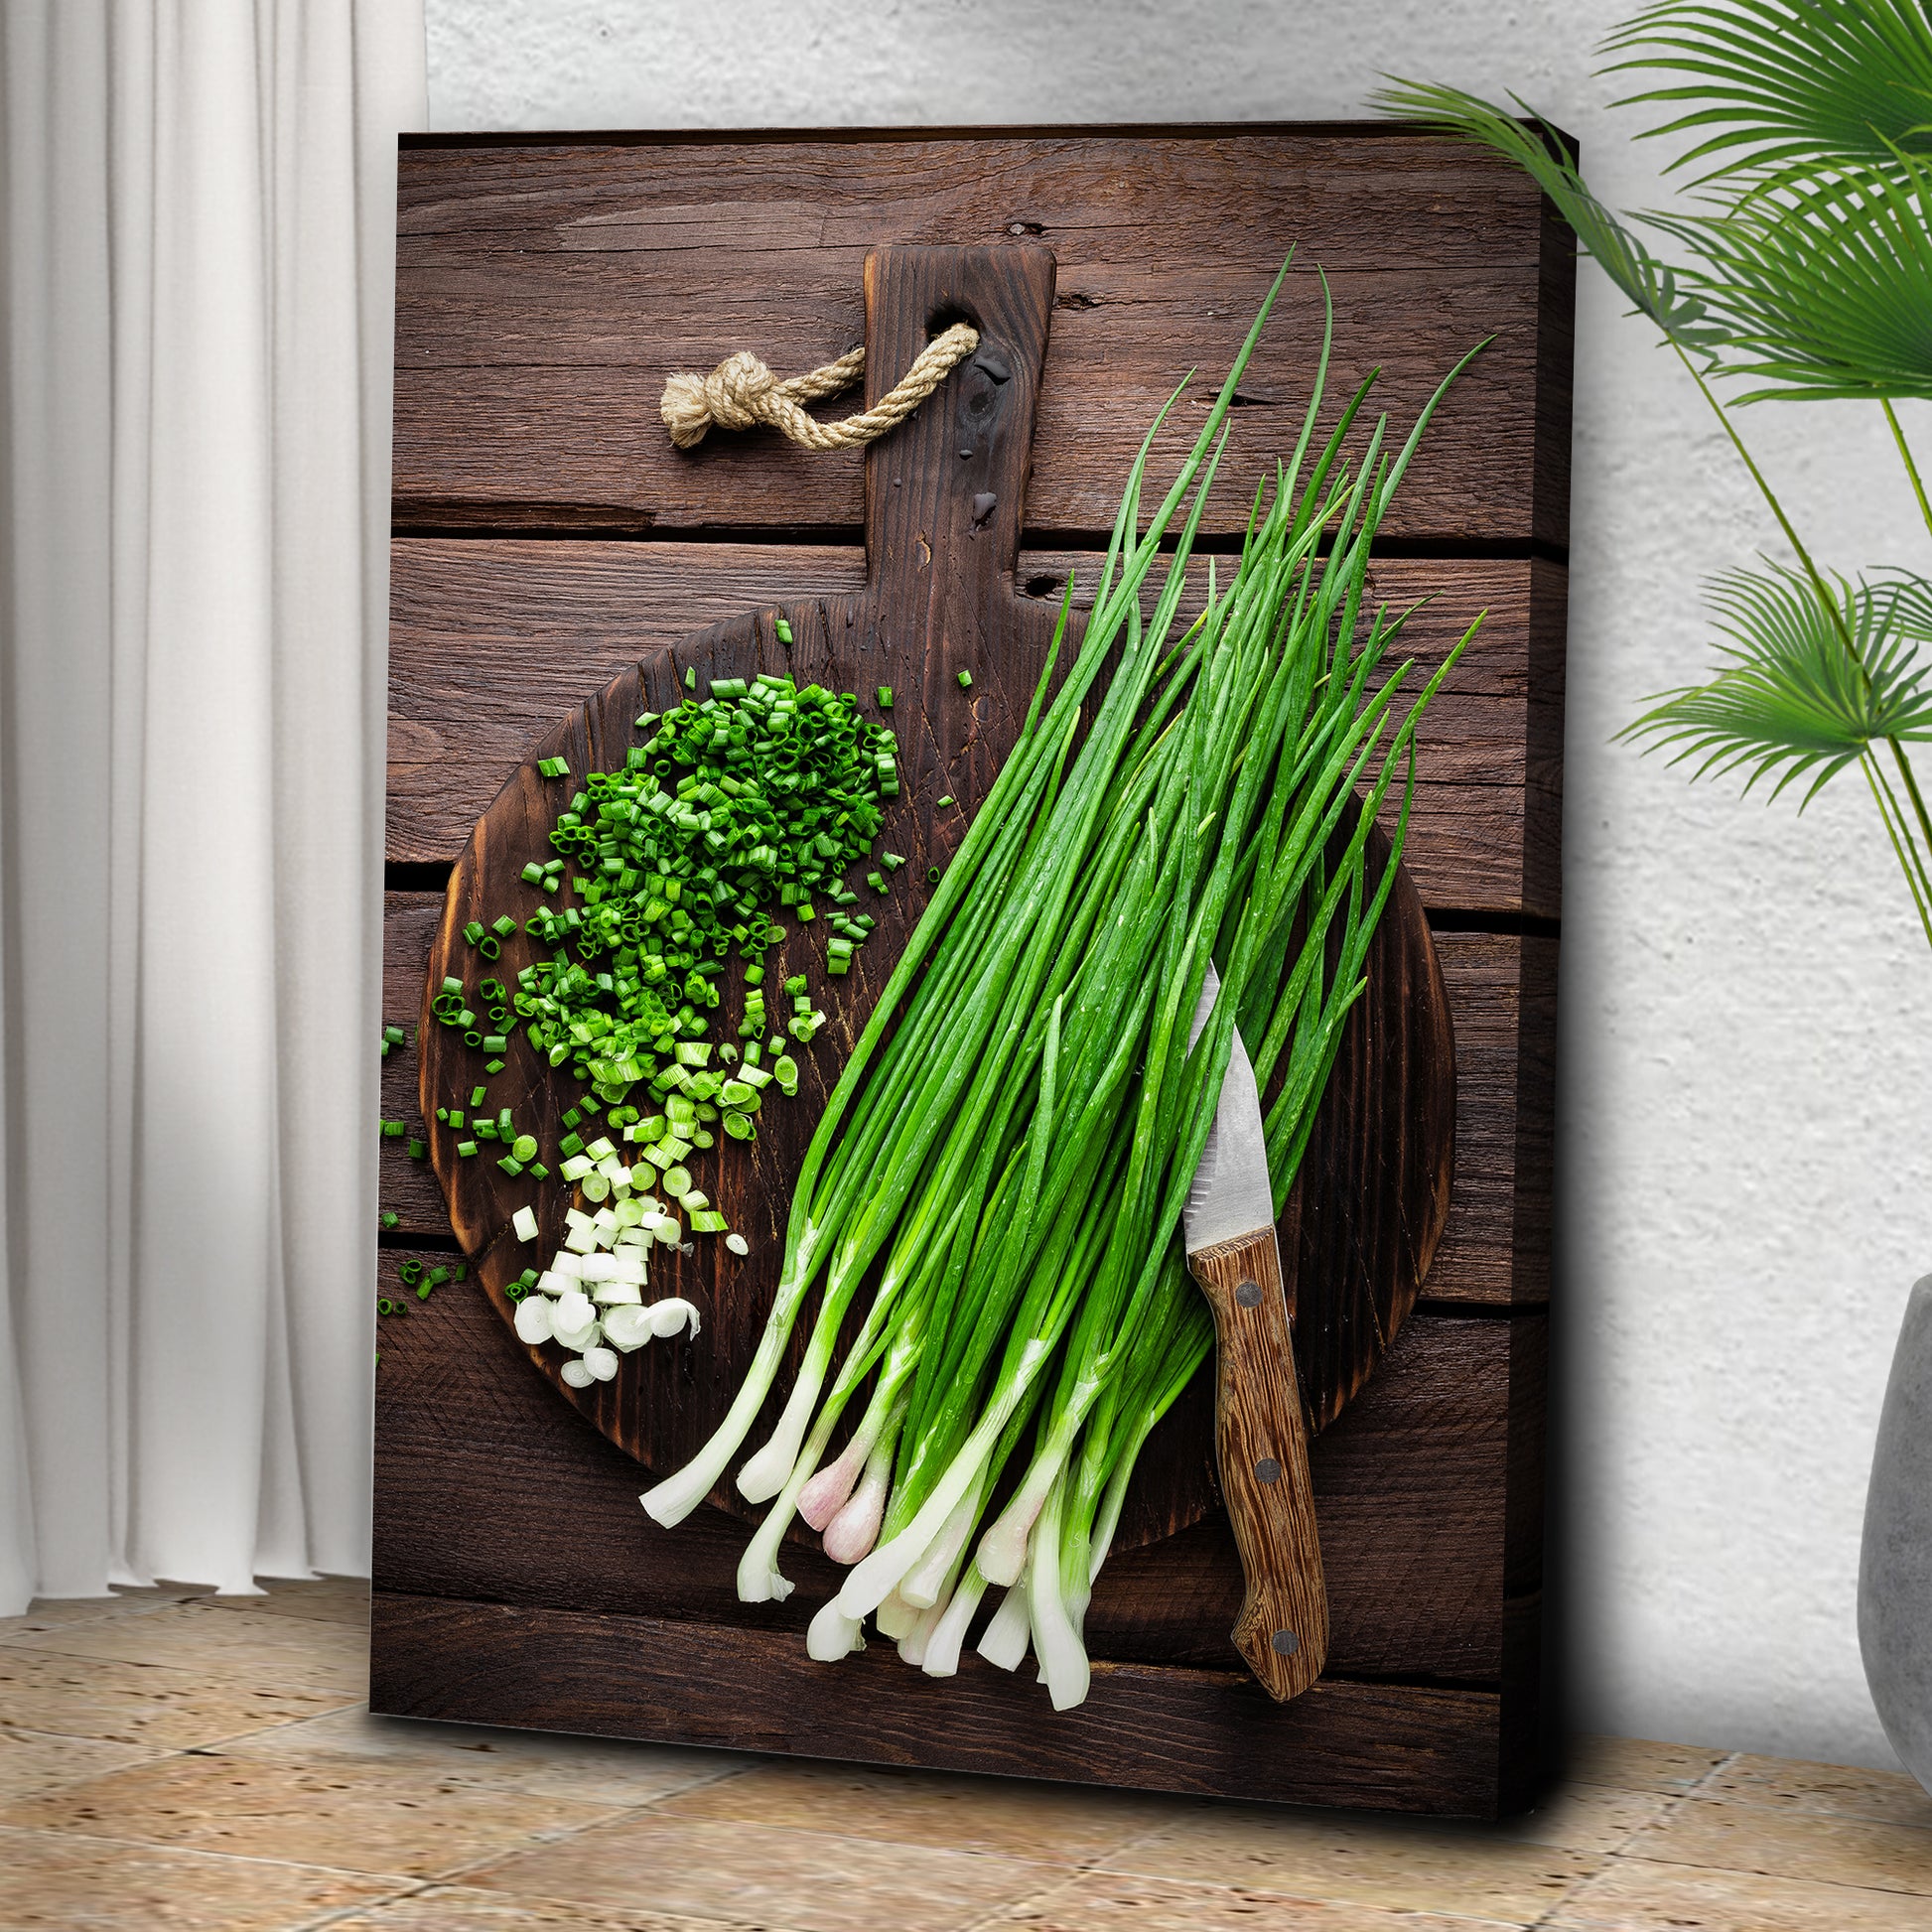 Plant Herb Chopped Chives Canvas Wall Art Style 2 - Image by Tailored Canvases